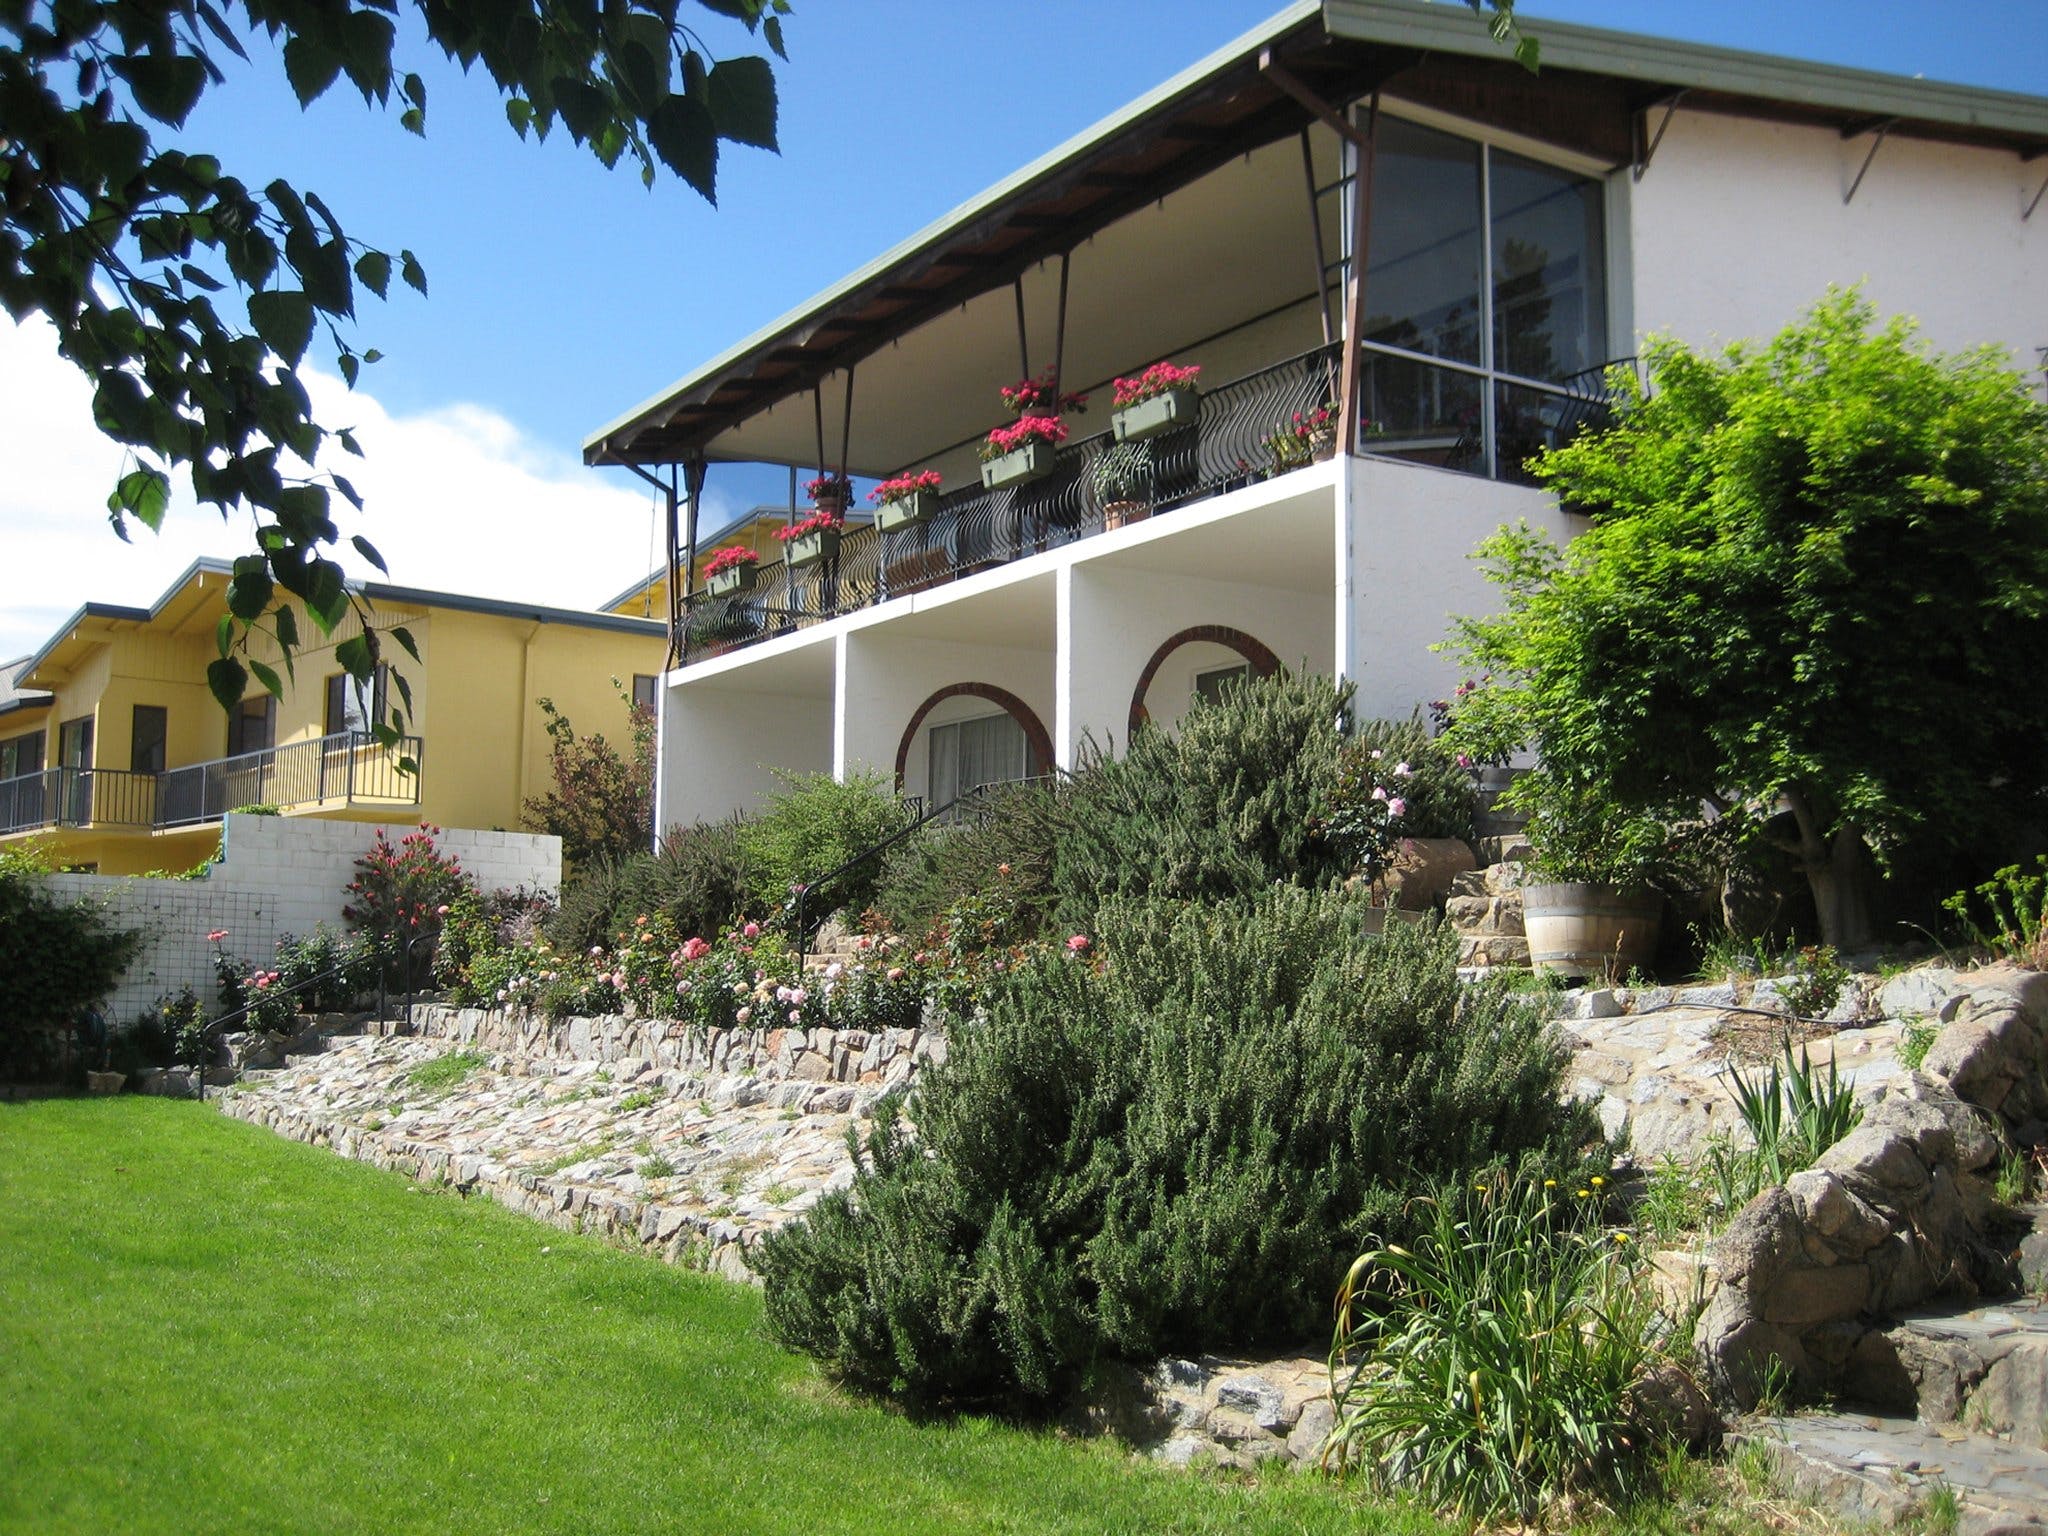 Sages Haus Bed And Breakfast - Accommodation Bookings 1